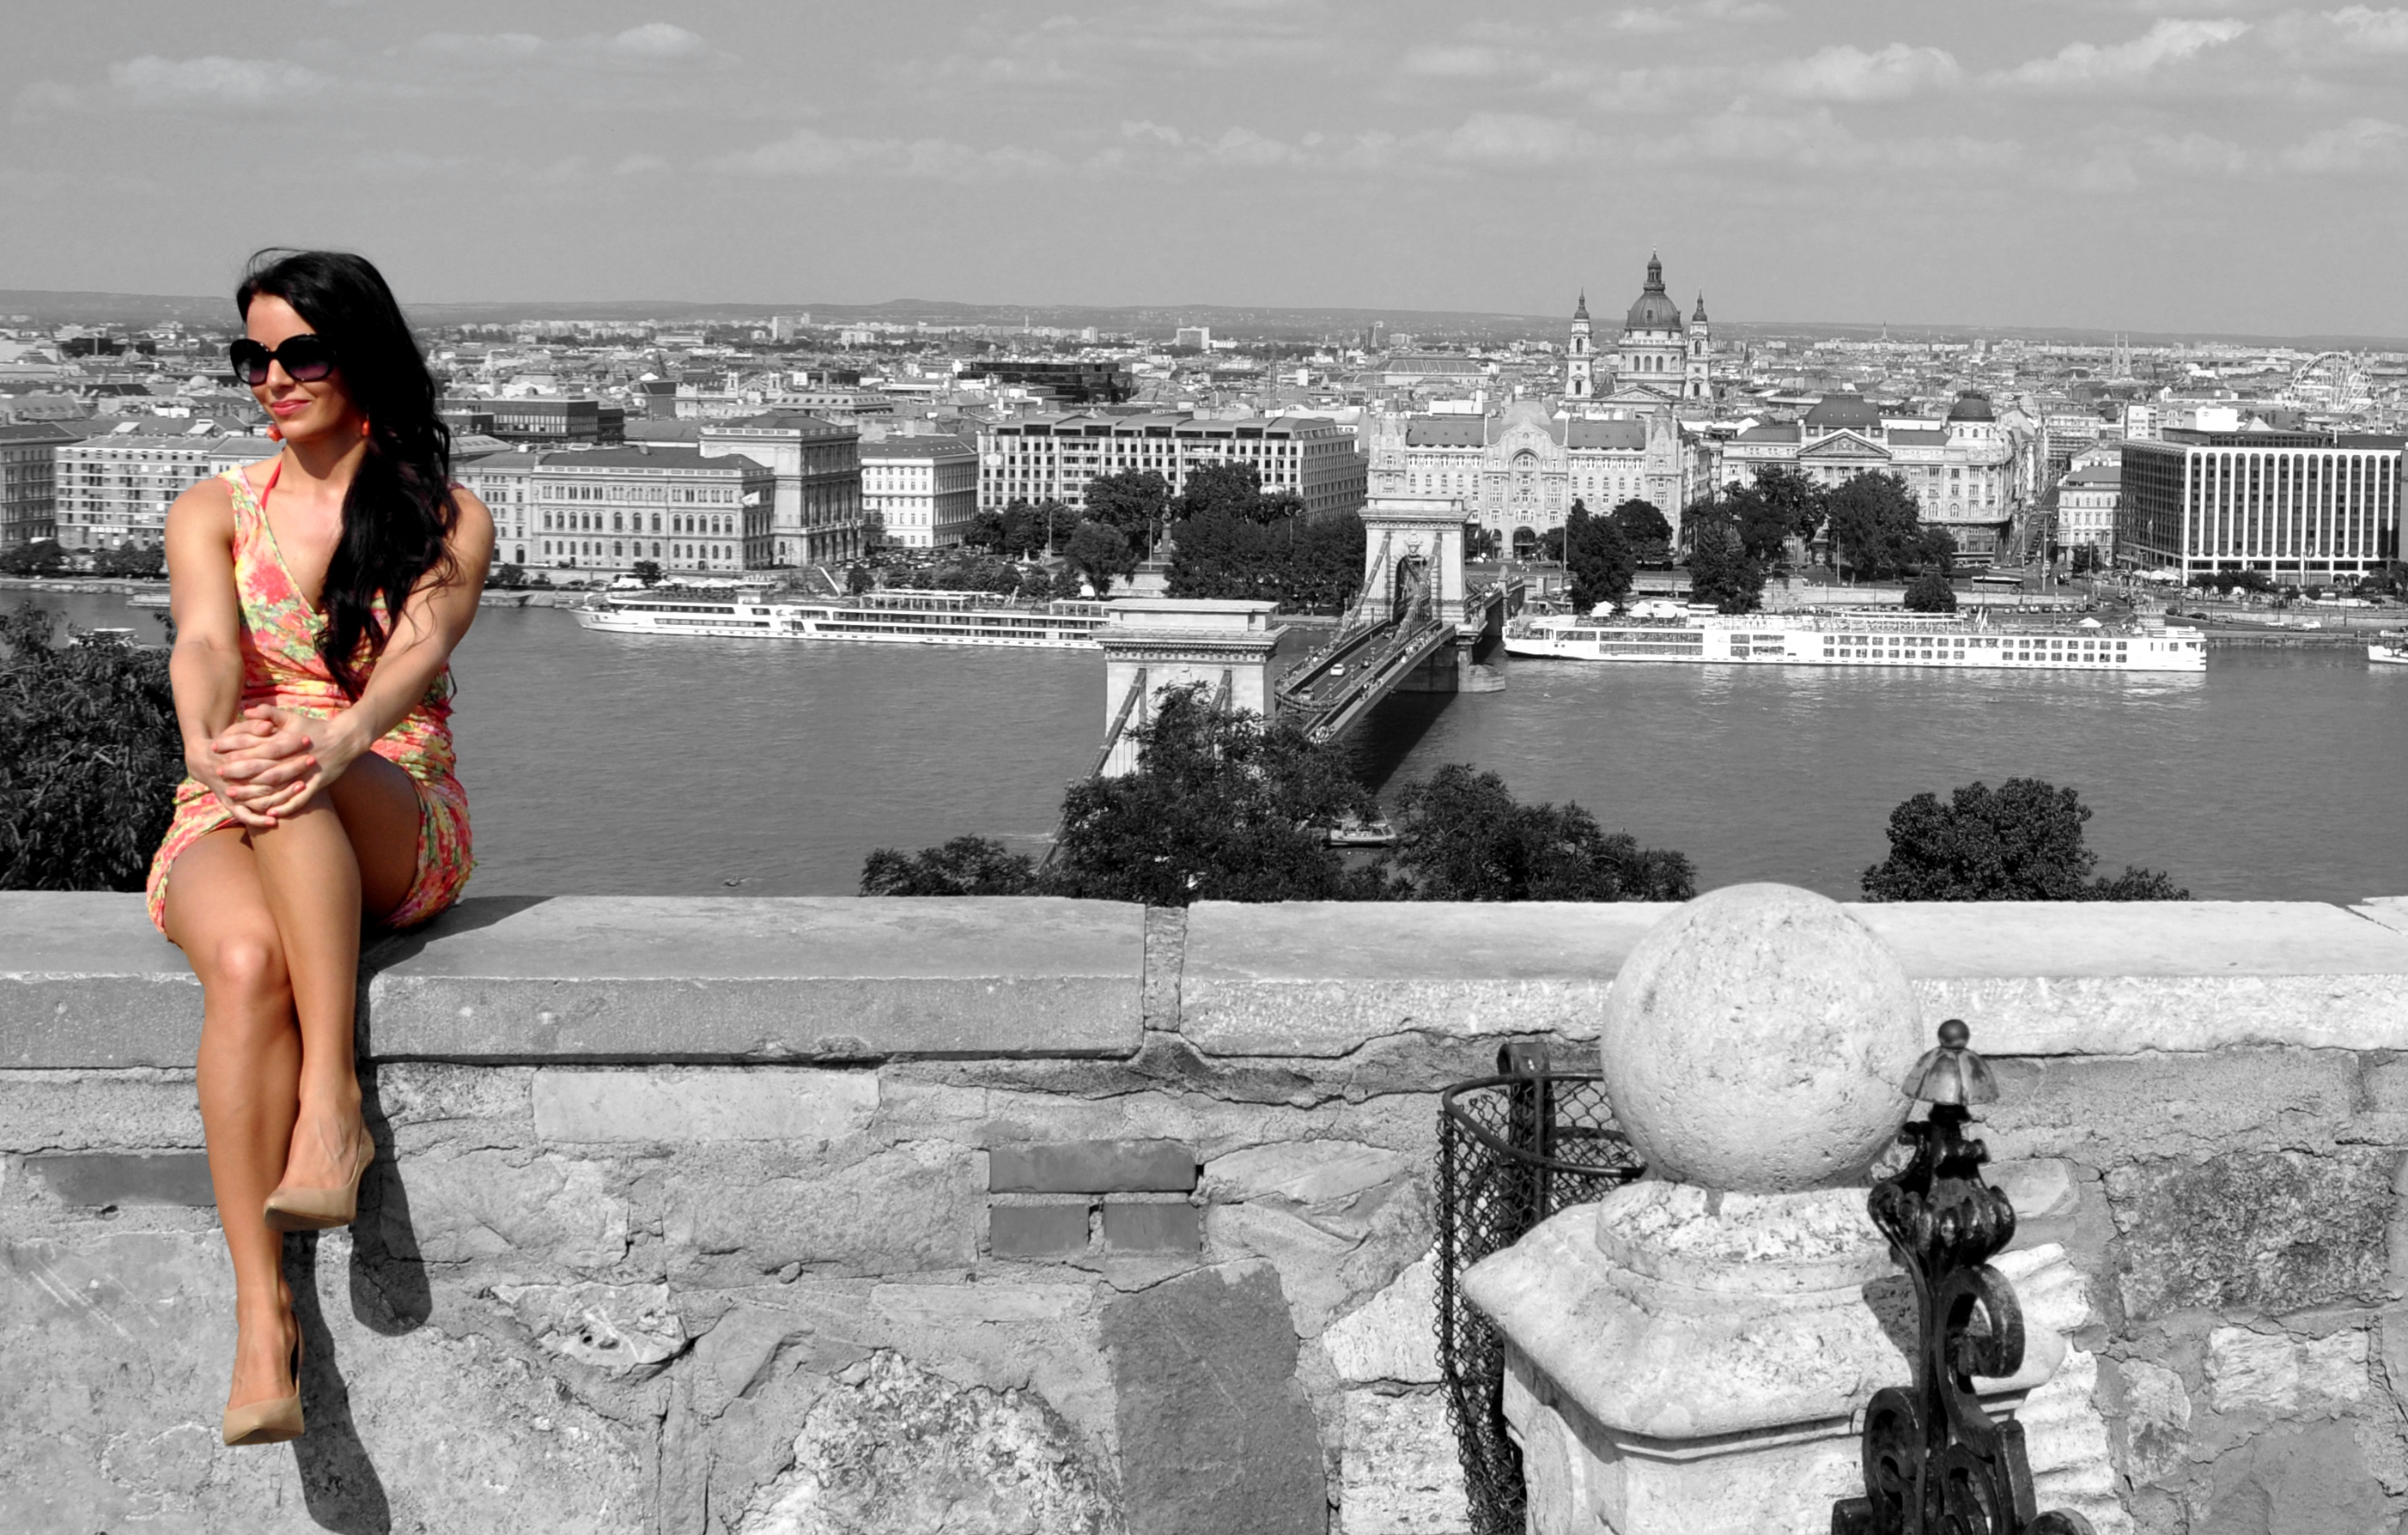 People 2804x1788 women model long hair women outdoors bridge Chain Bridge Budapest Hungary cityscape selective coloring Danube building women with shades legs high heels minidress cathedral Hungarian sunglasses ship river